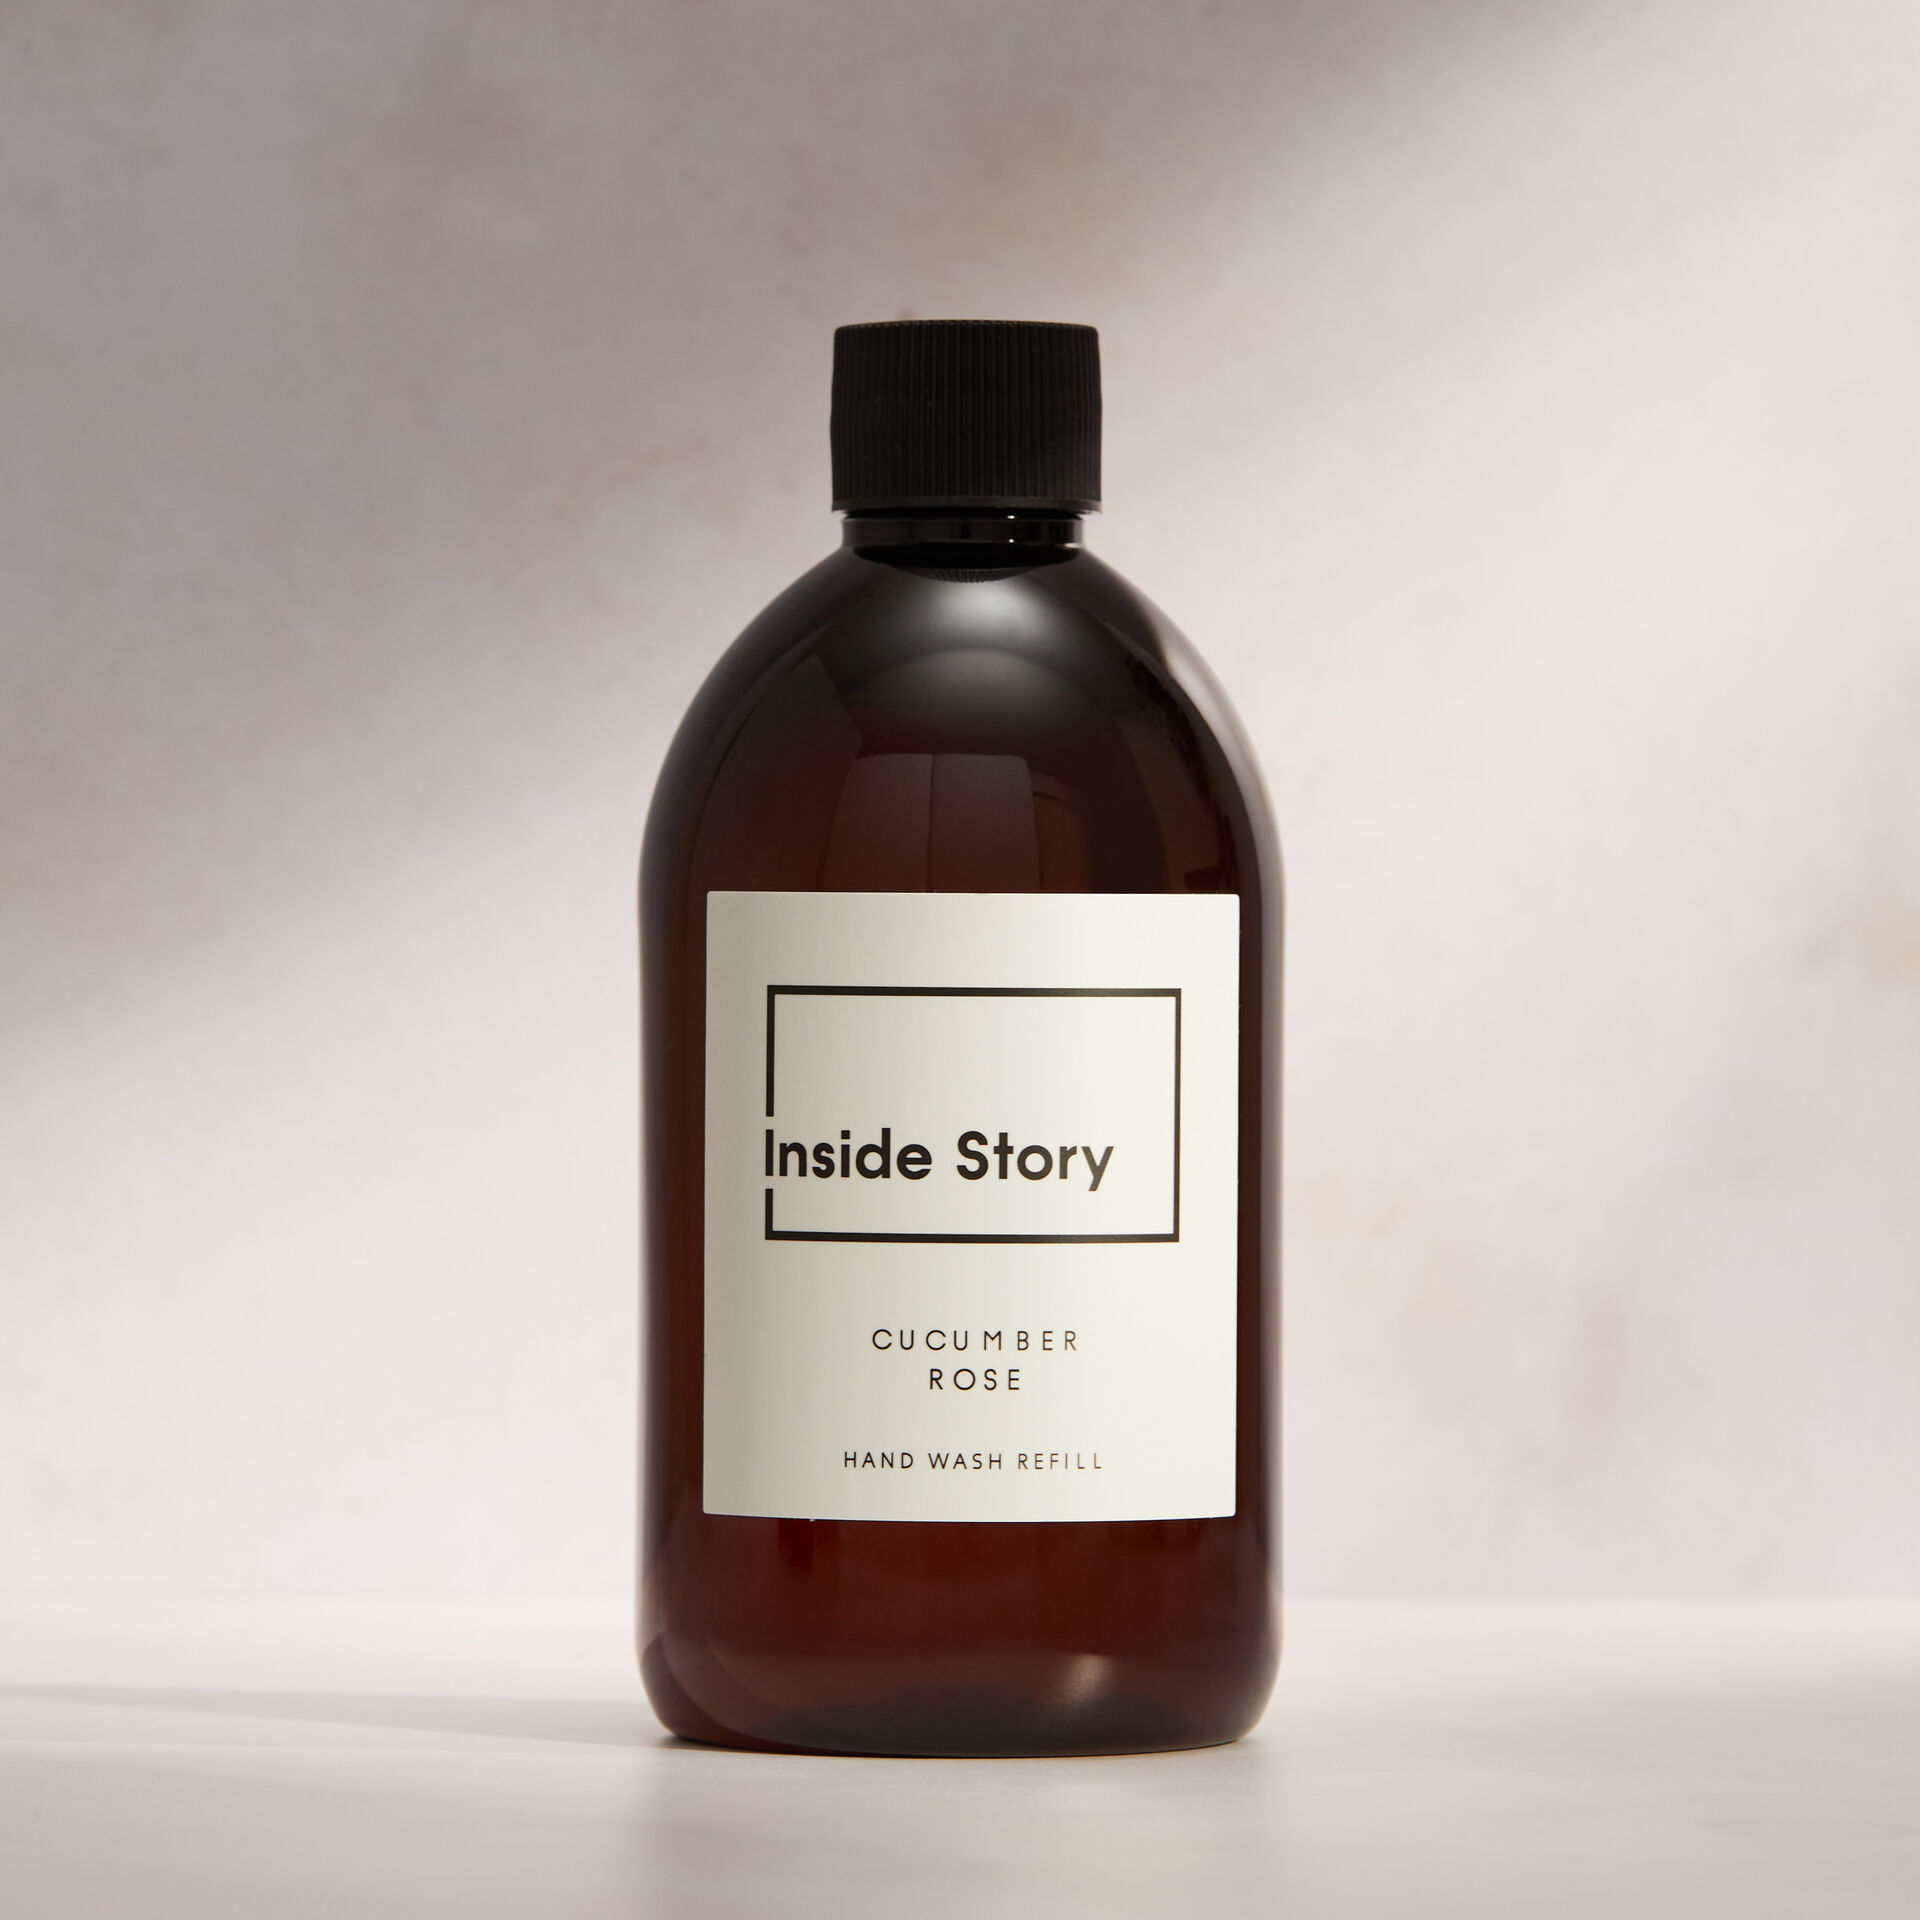 ${product-id}-Cucumber And Rose Scented Hand Wash Refill-Cucumber Rose-${view-type}